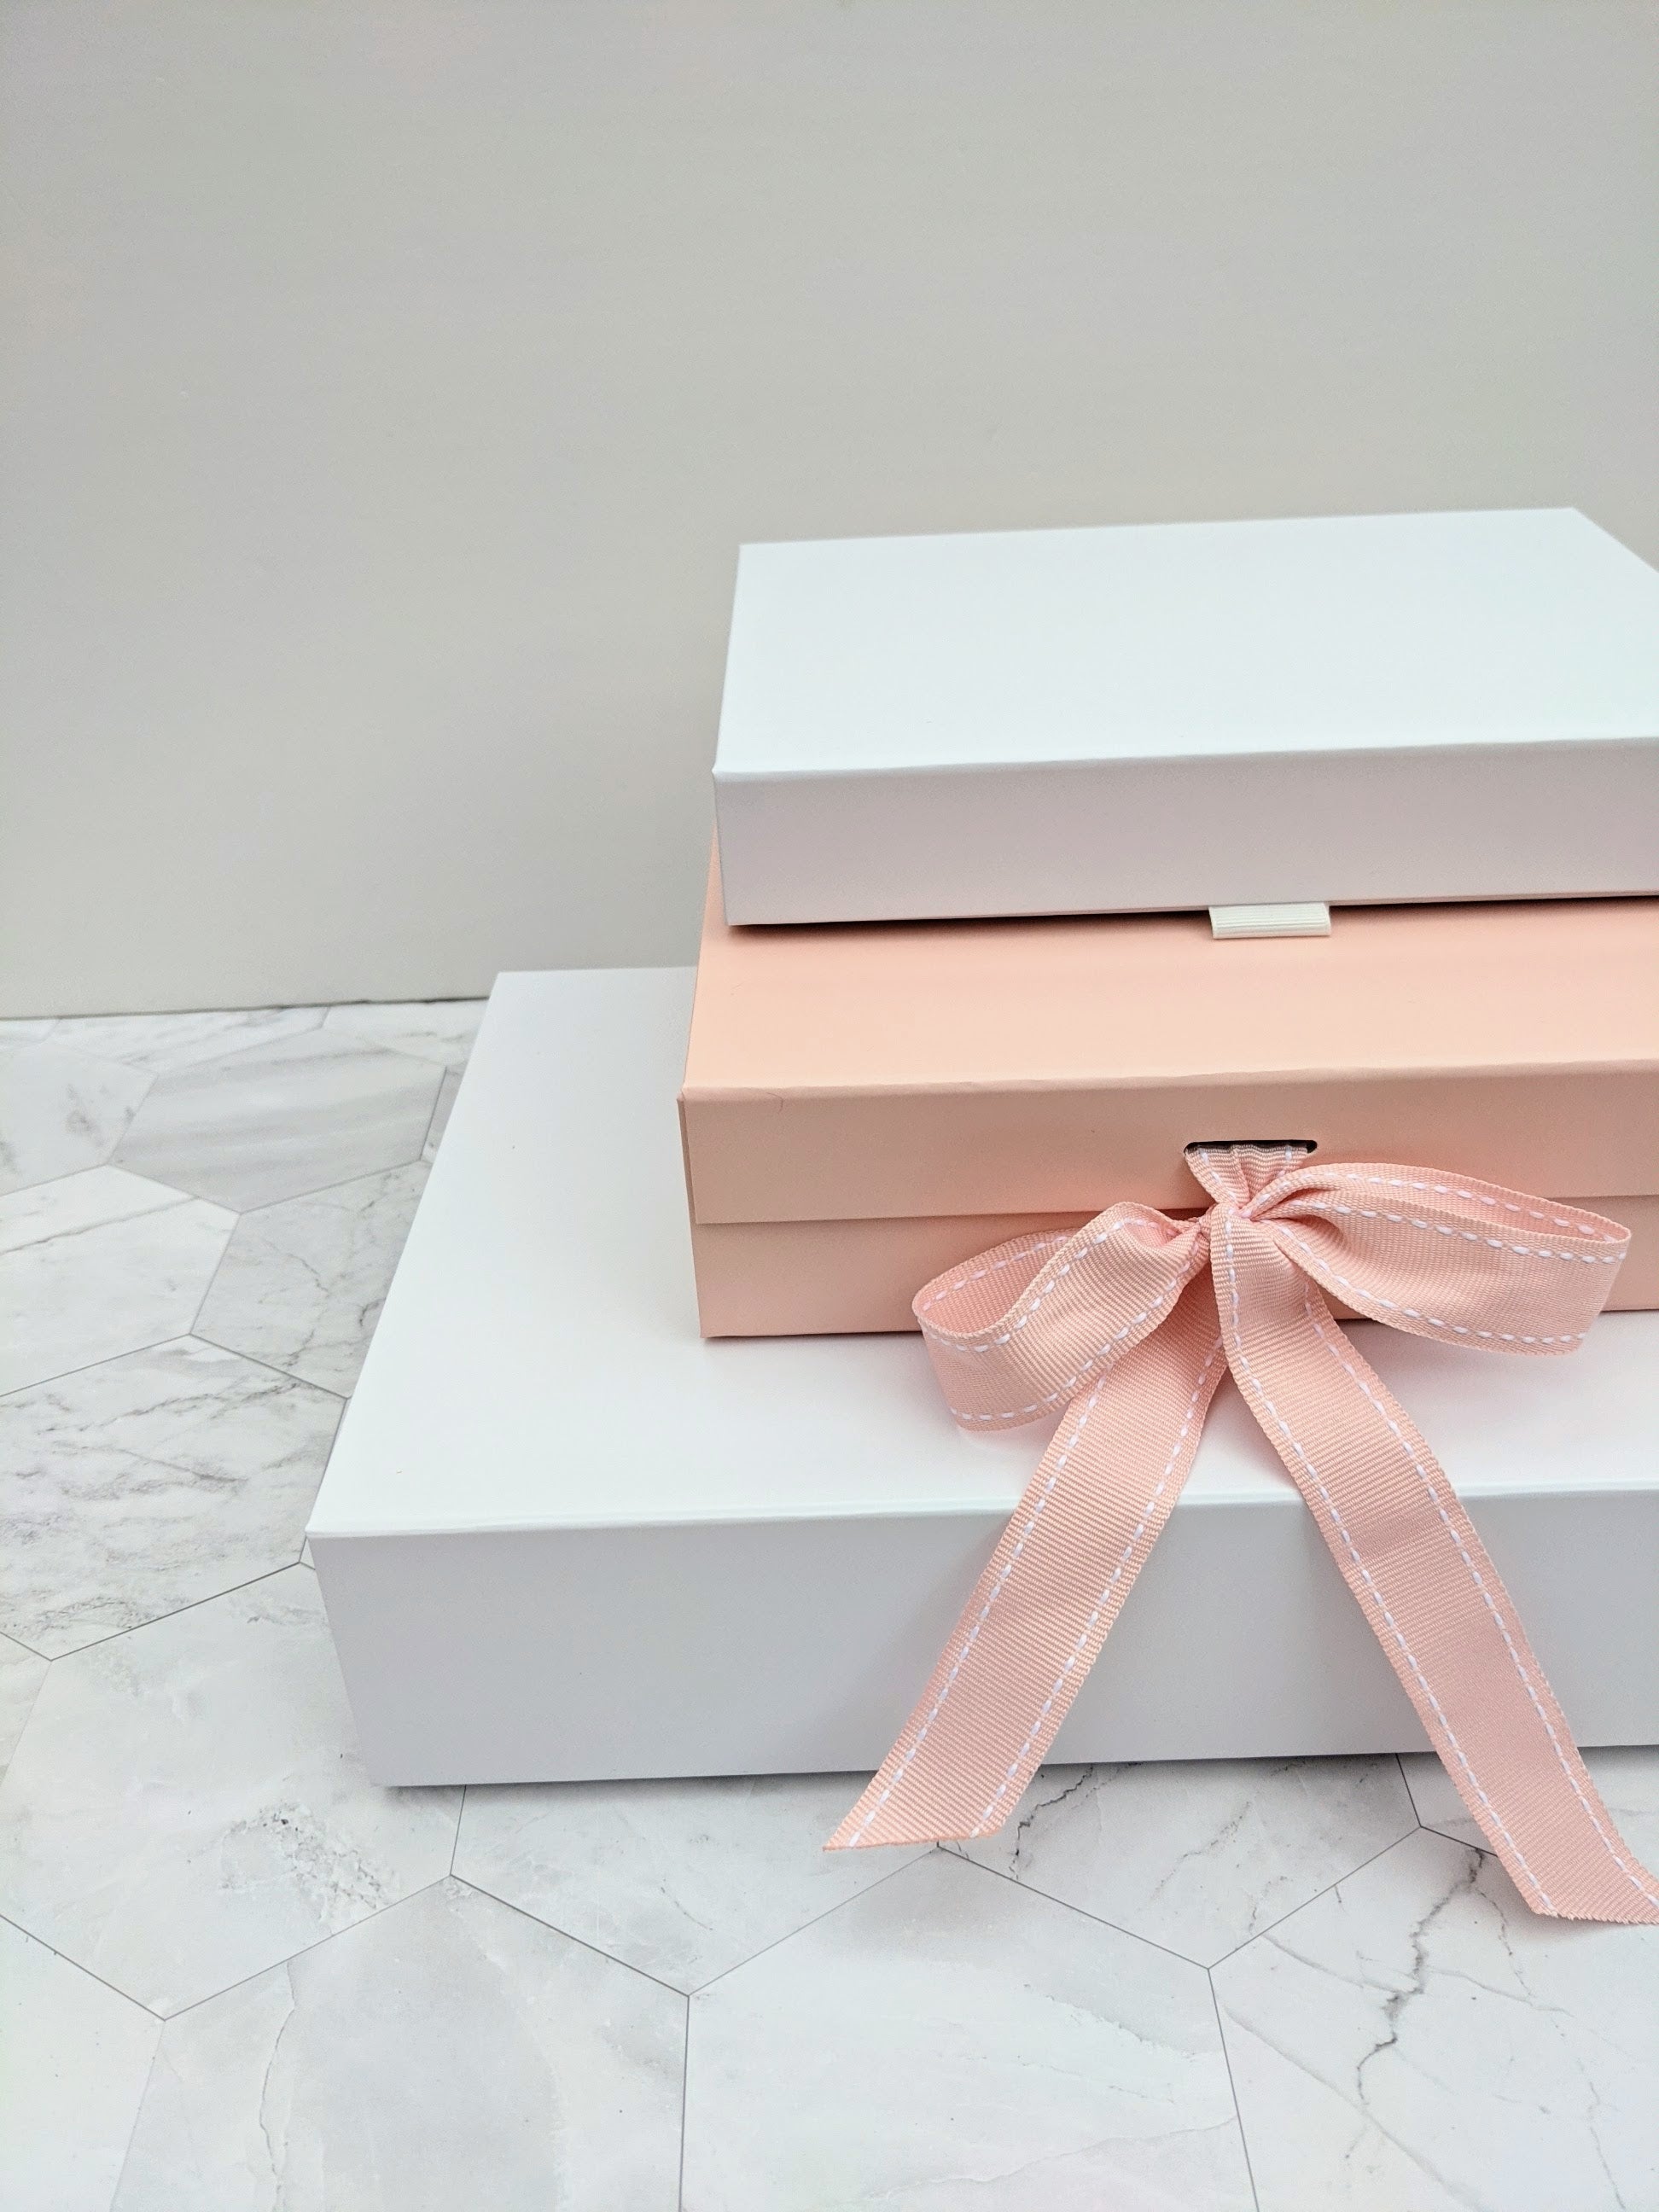 Luxury Black Gift Box Wrap Boxes with Lid Cover Ribbon - China Paper Gift  Box and Gift Box price